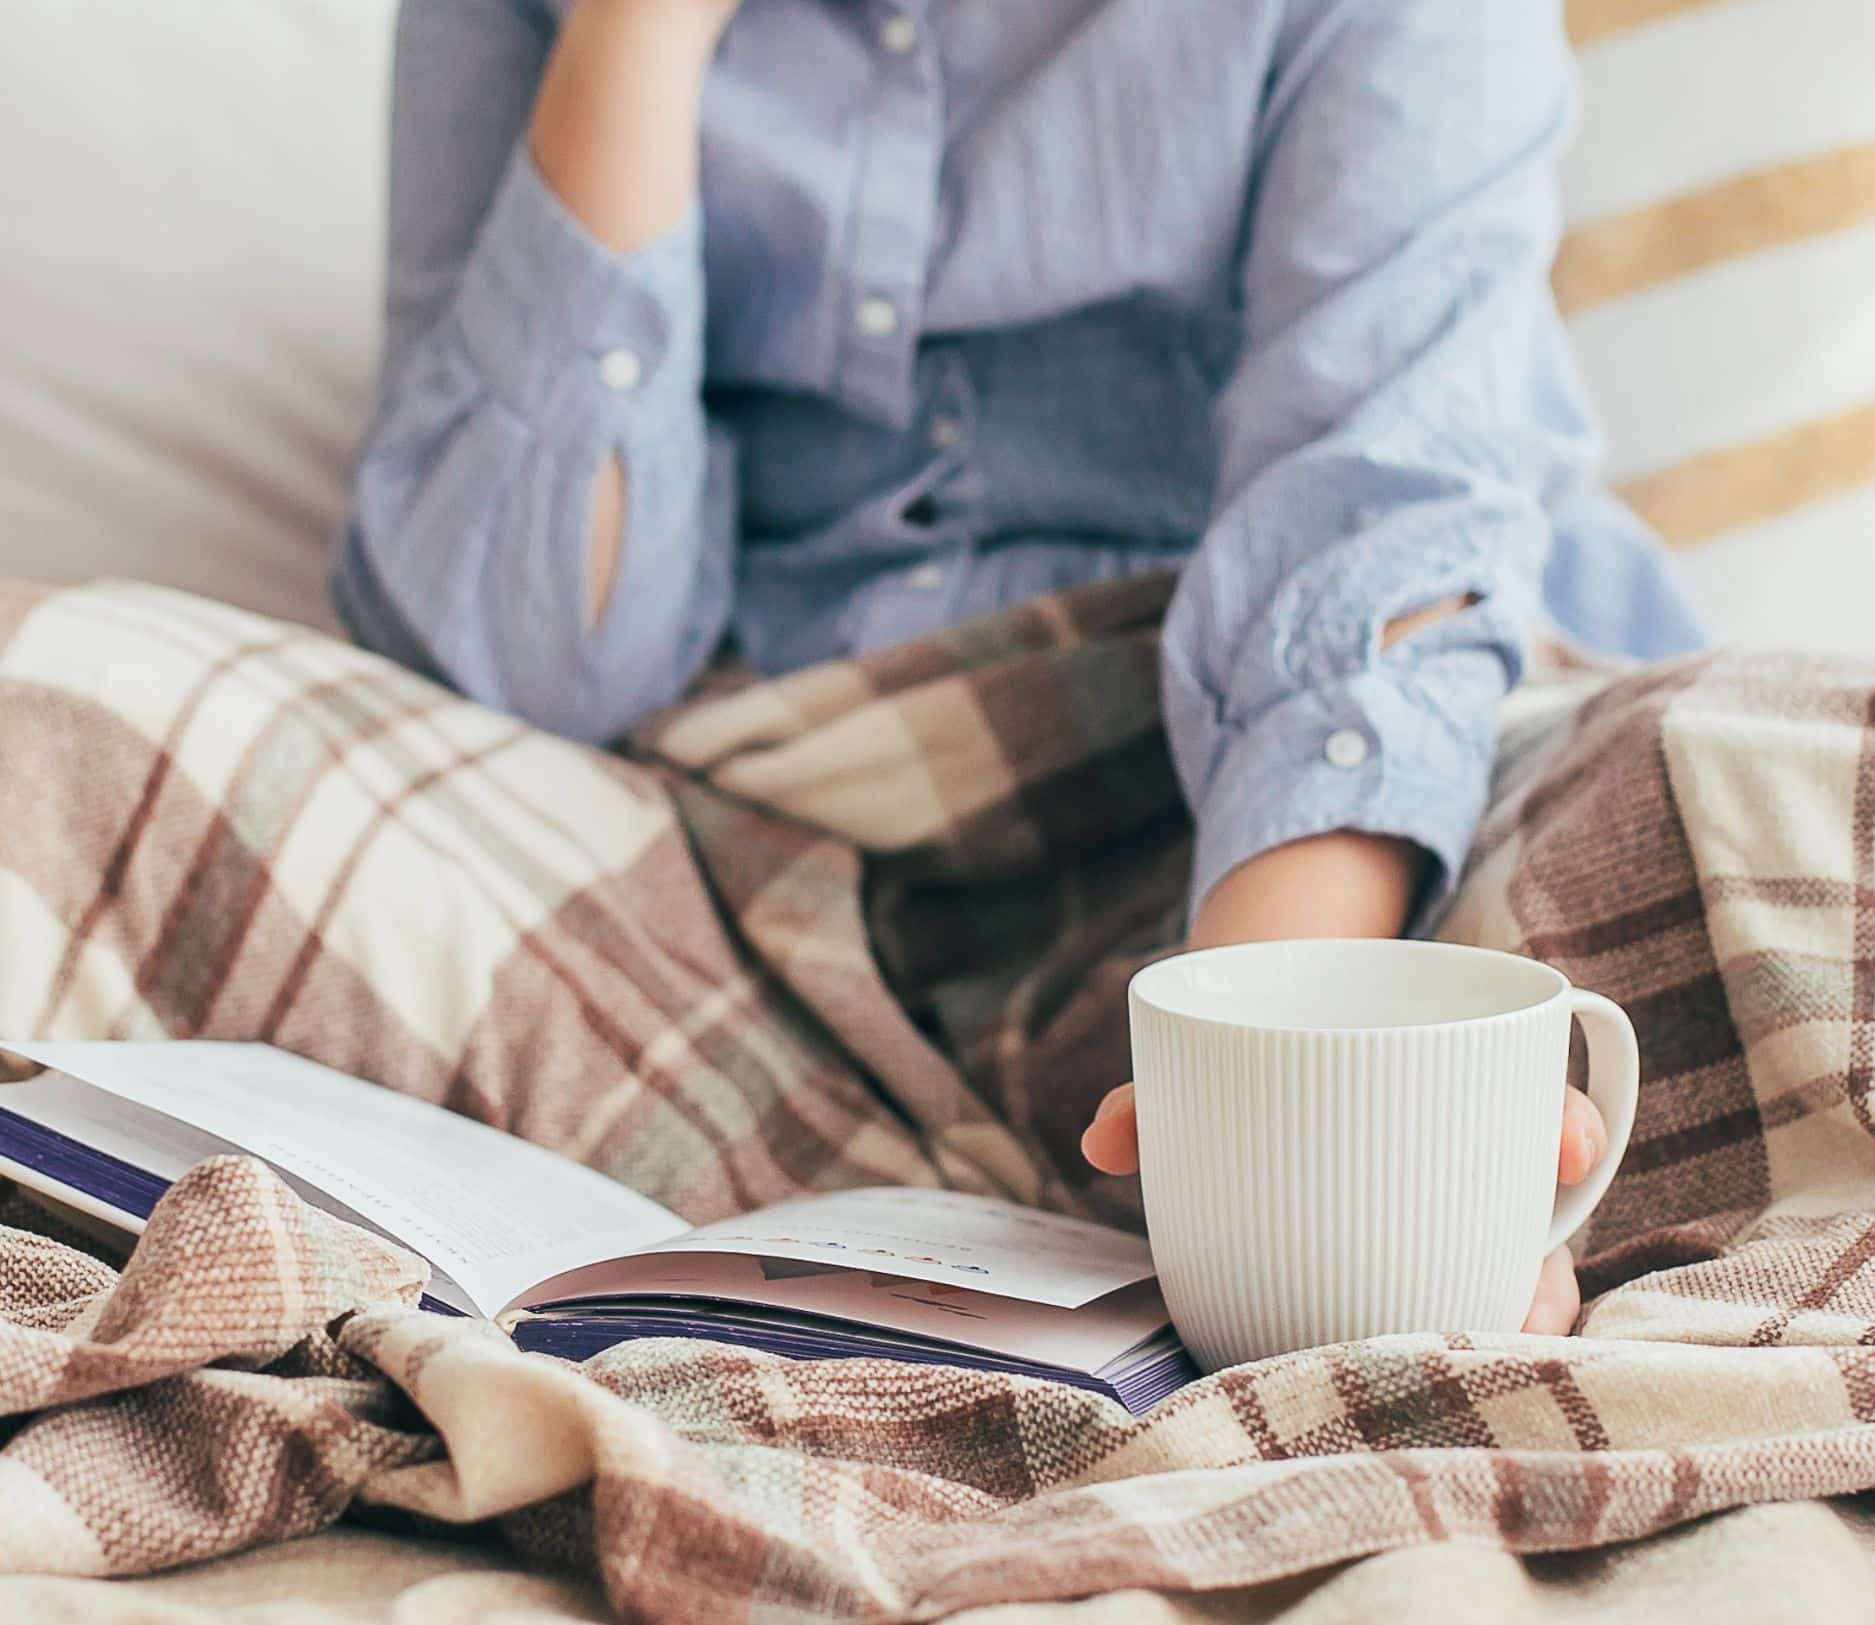 Woman resting trying to reduce stress and drink a mug of tea.